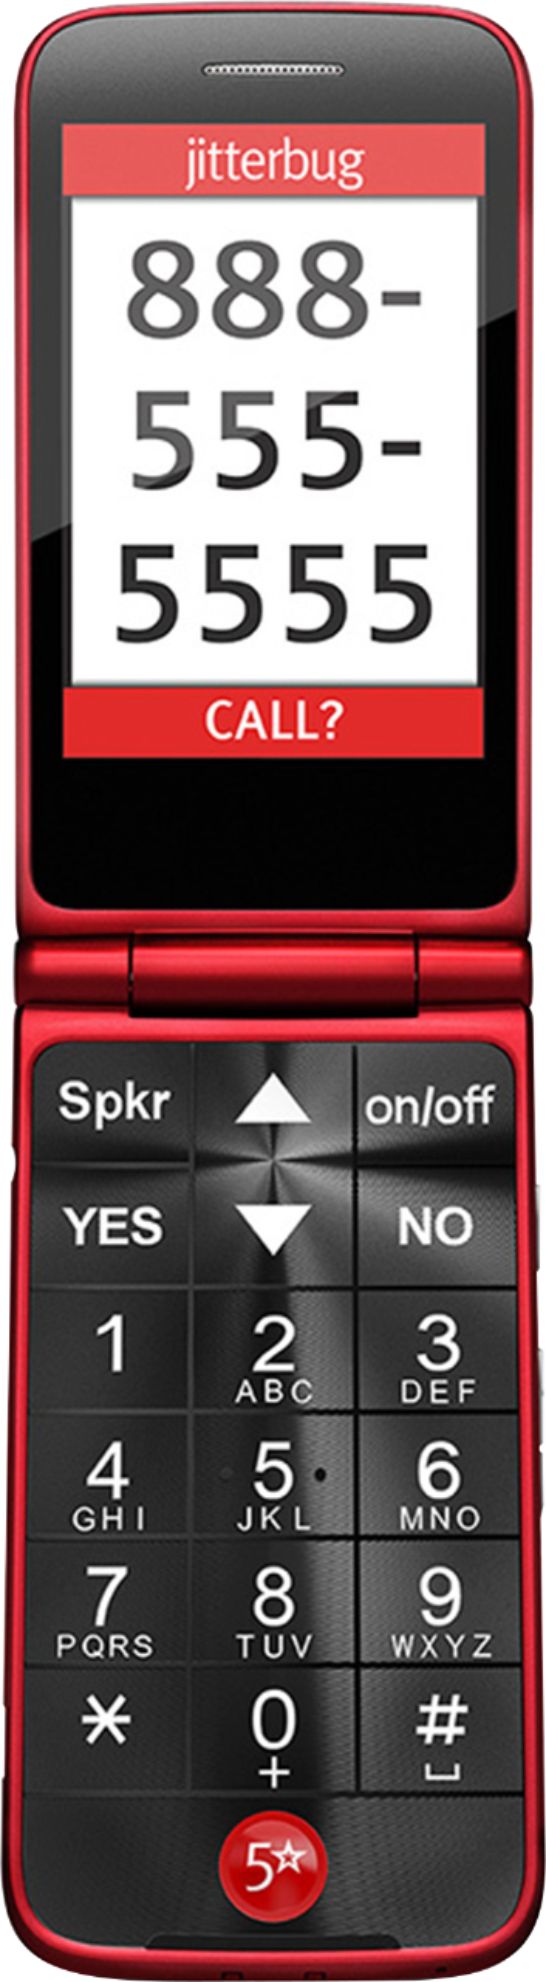 GreatCall - GreatCall Flip Prepaid Cell Phone for Seniors - Red